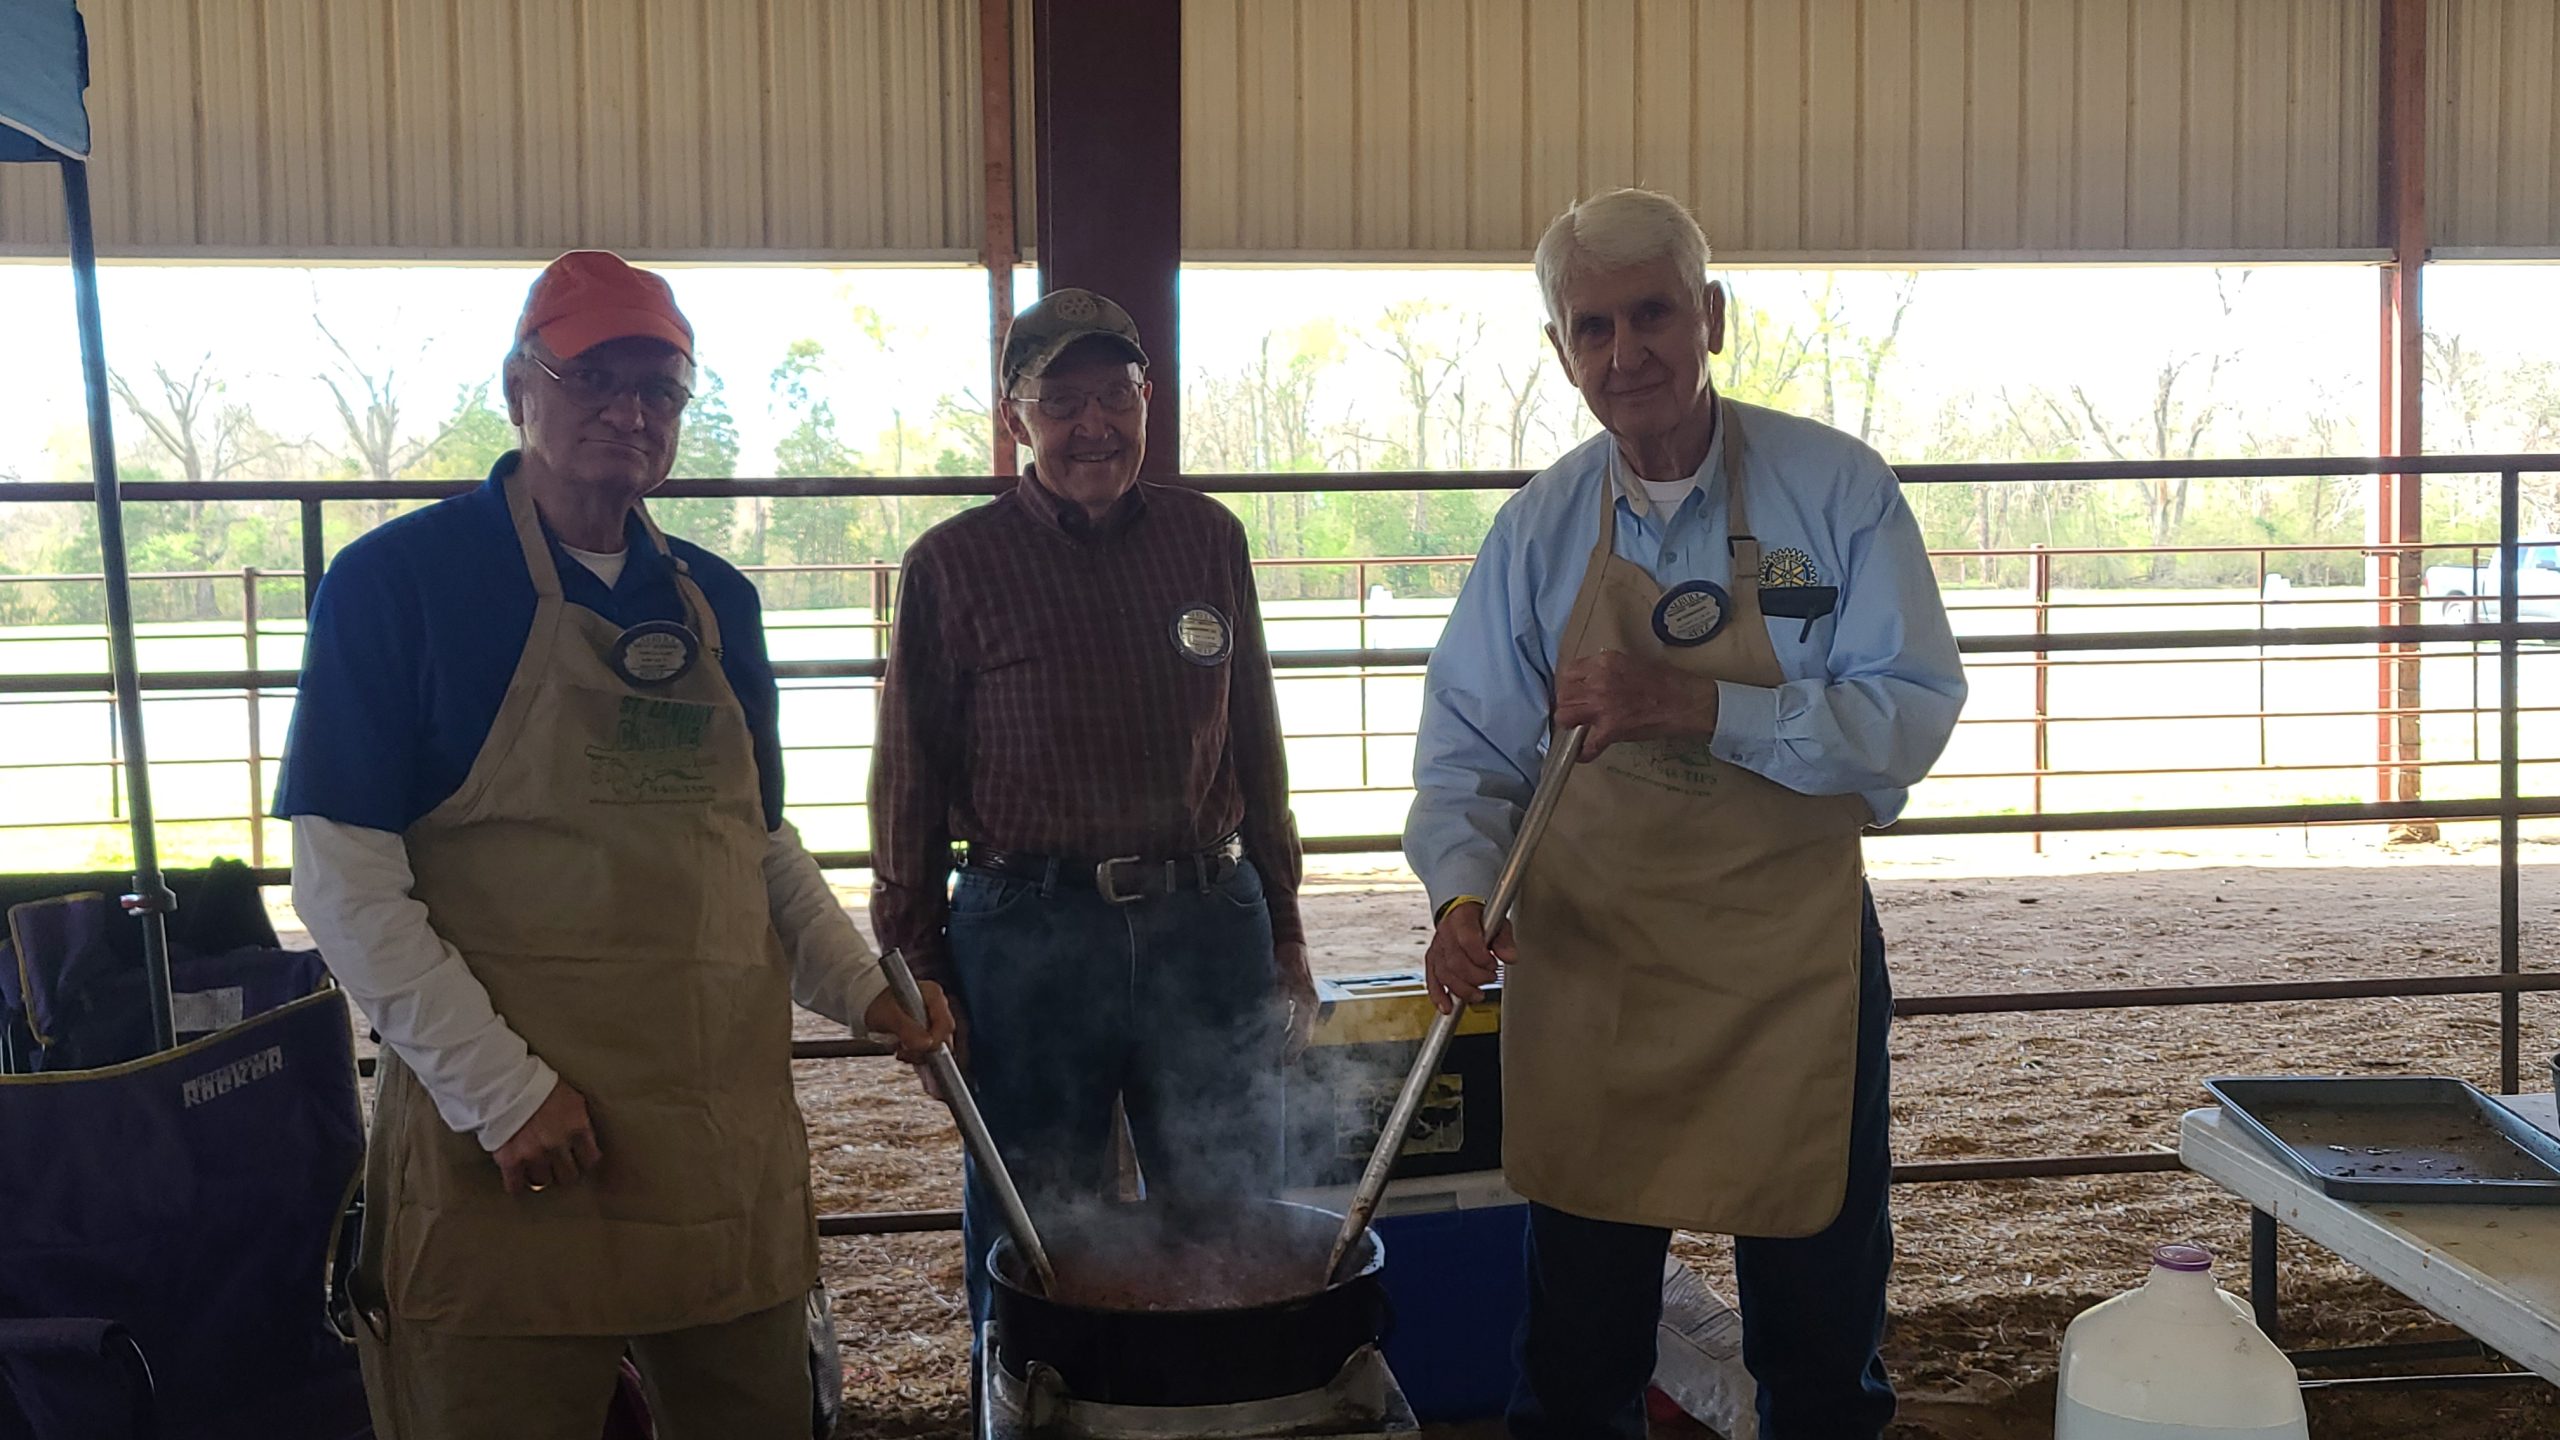 Rotary Club Chili Cook-off